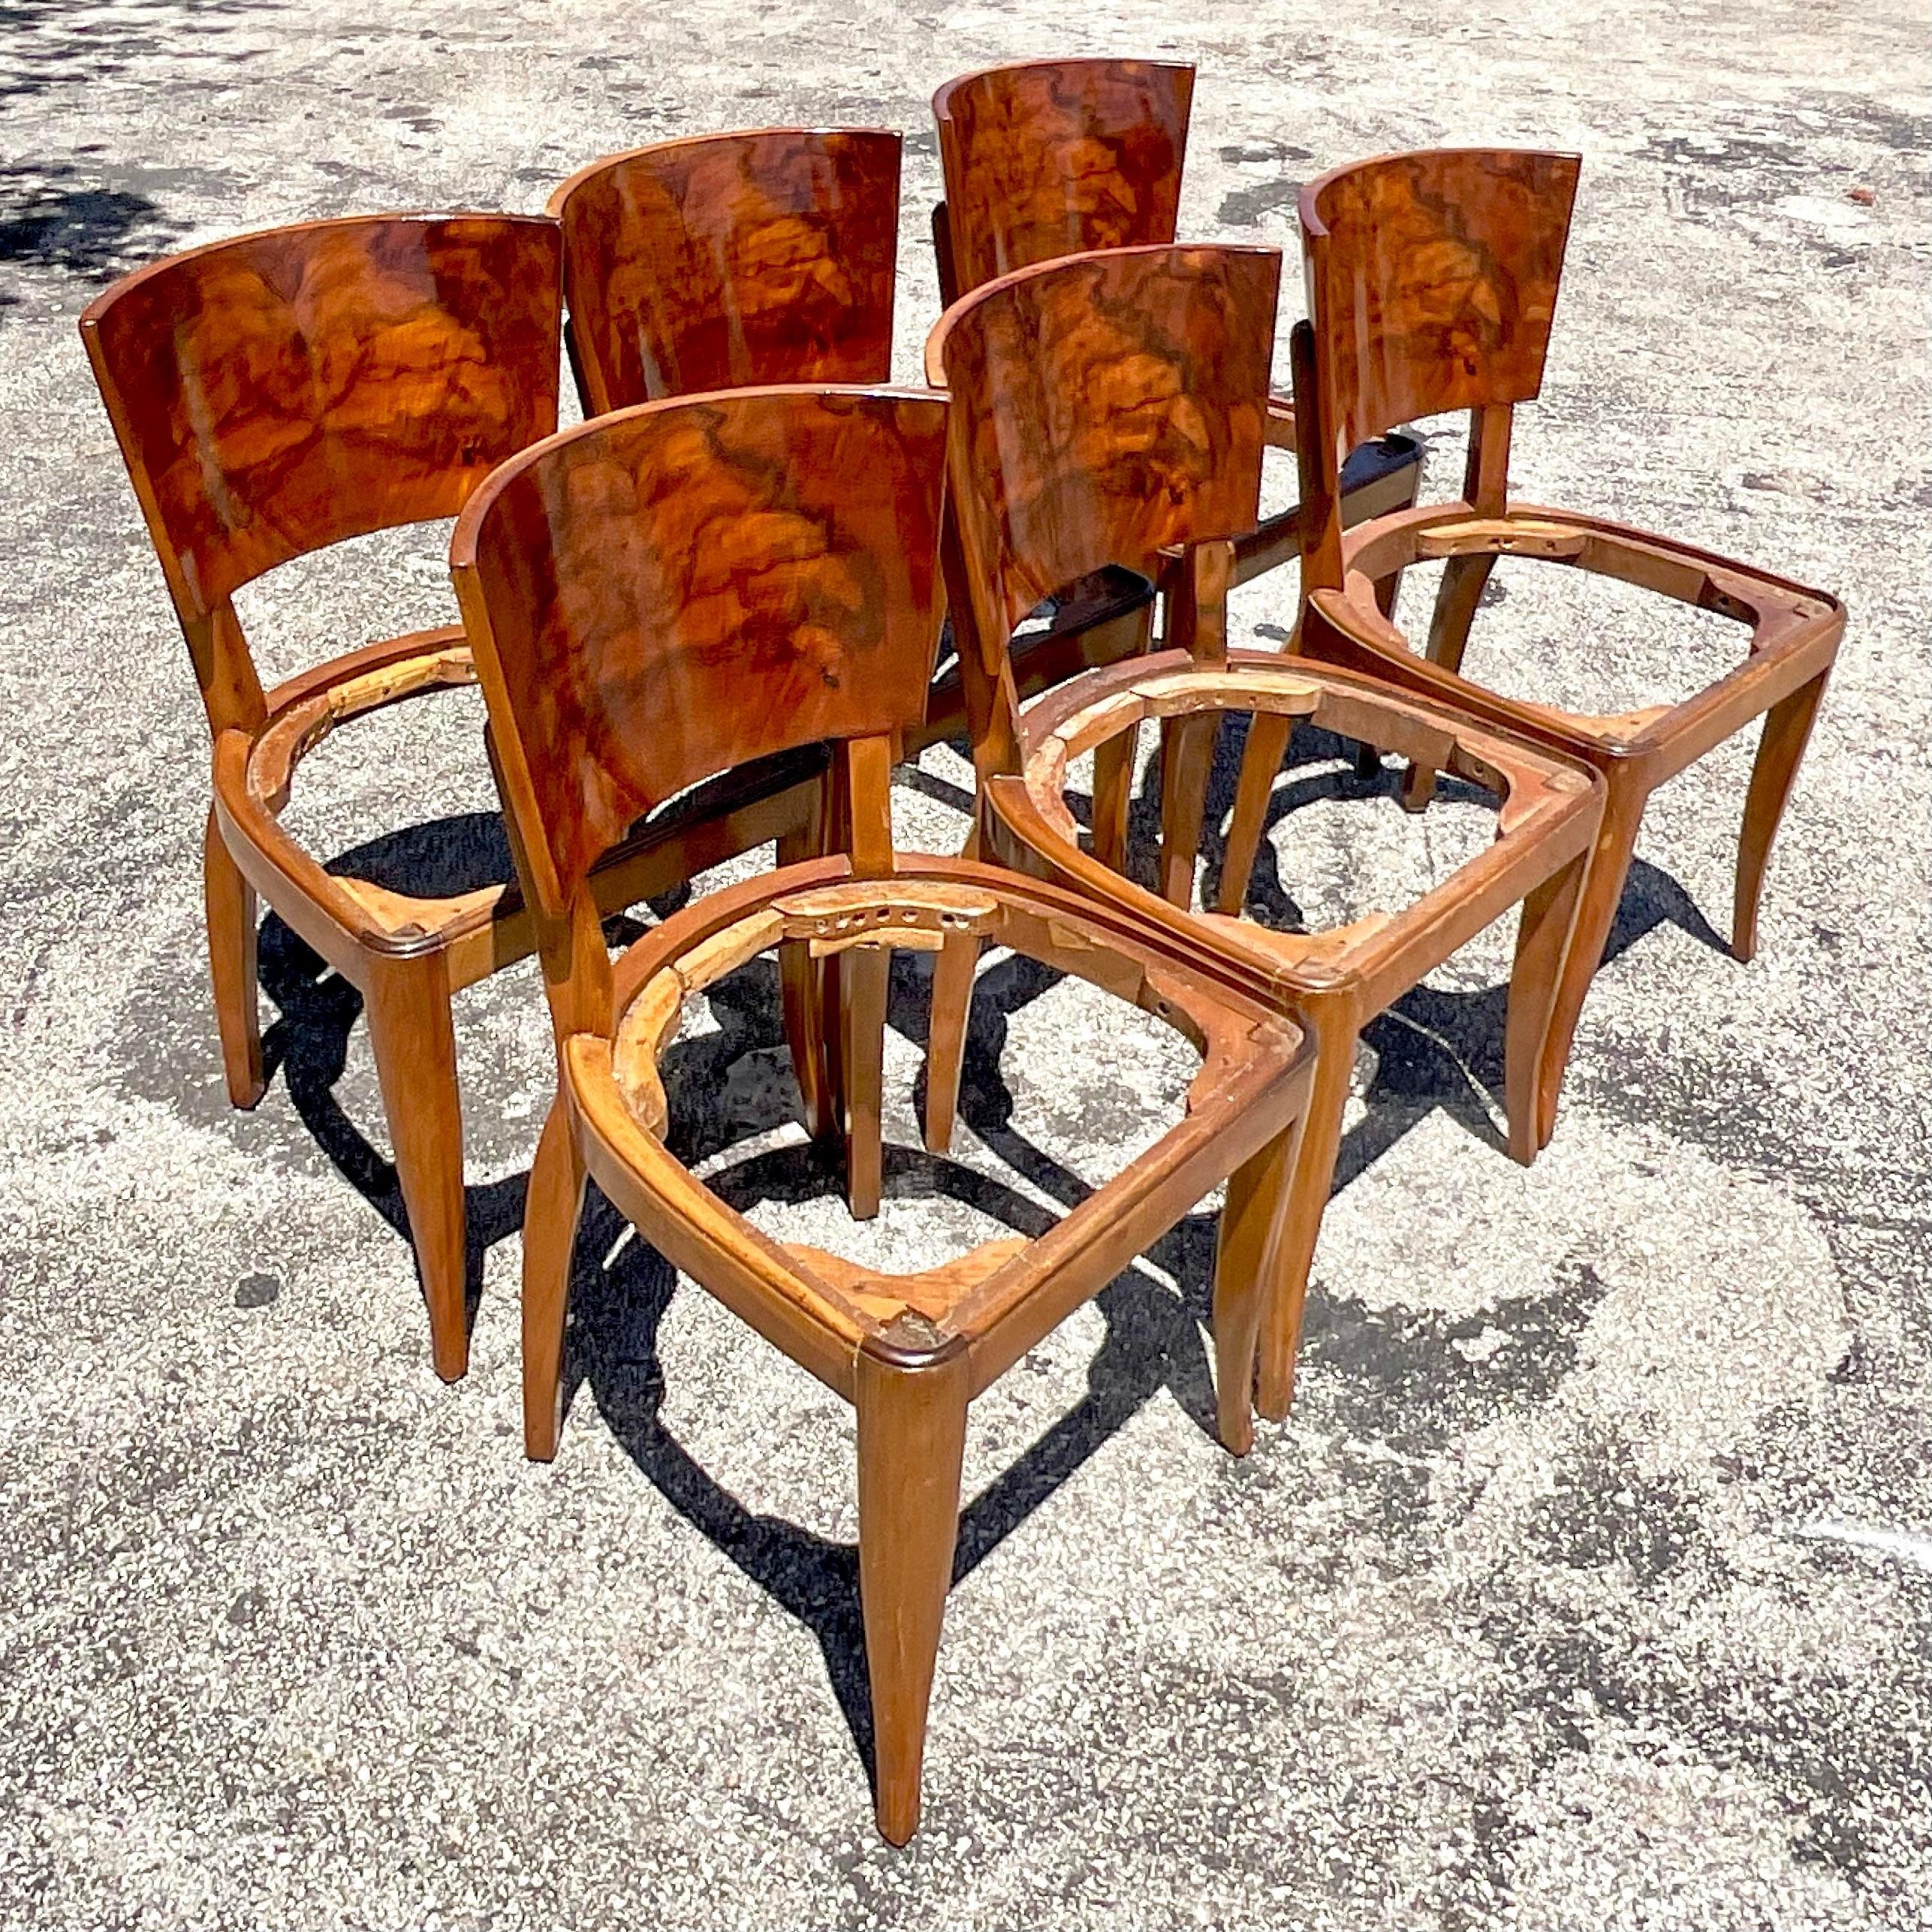 Vintage Deco Burl Wood Dining Chairs - Set of 6 For Sale 4